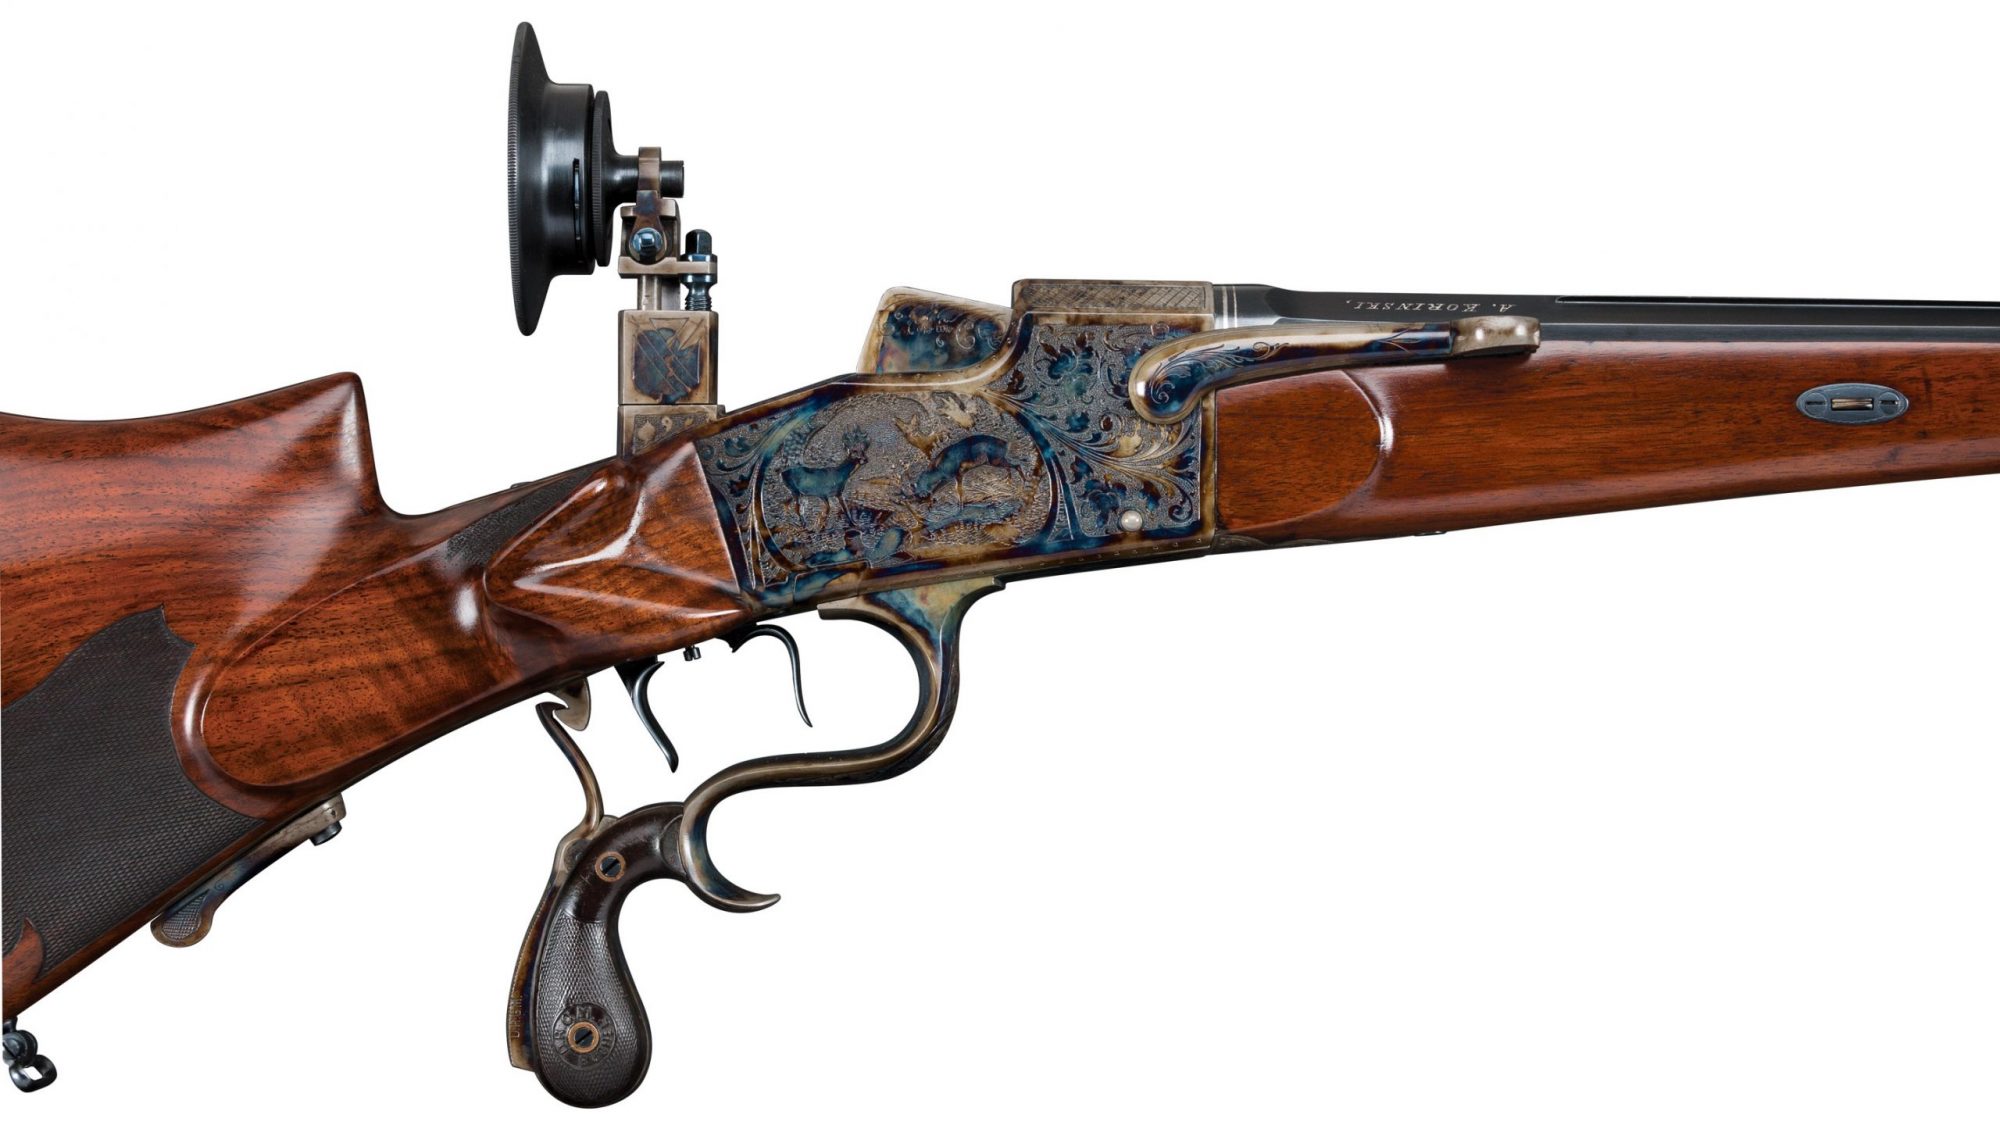 Restored color case hardened and engraved German gun receiver, originally manufactured in the 1920s, restored by Turnbull Restoration and featuring all period-correct metal and wood finishes